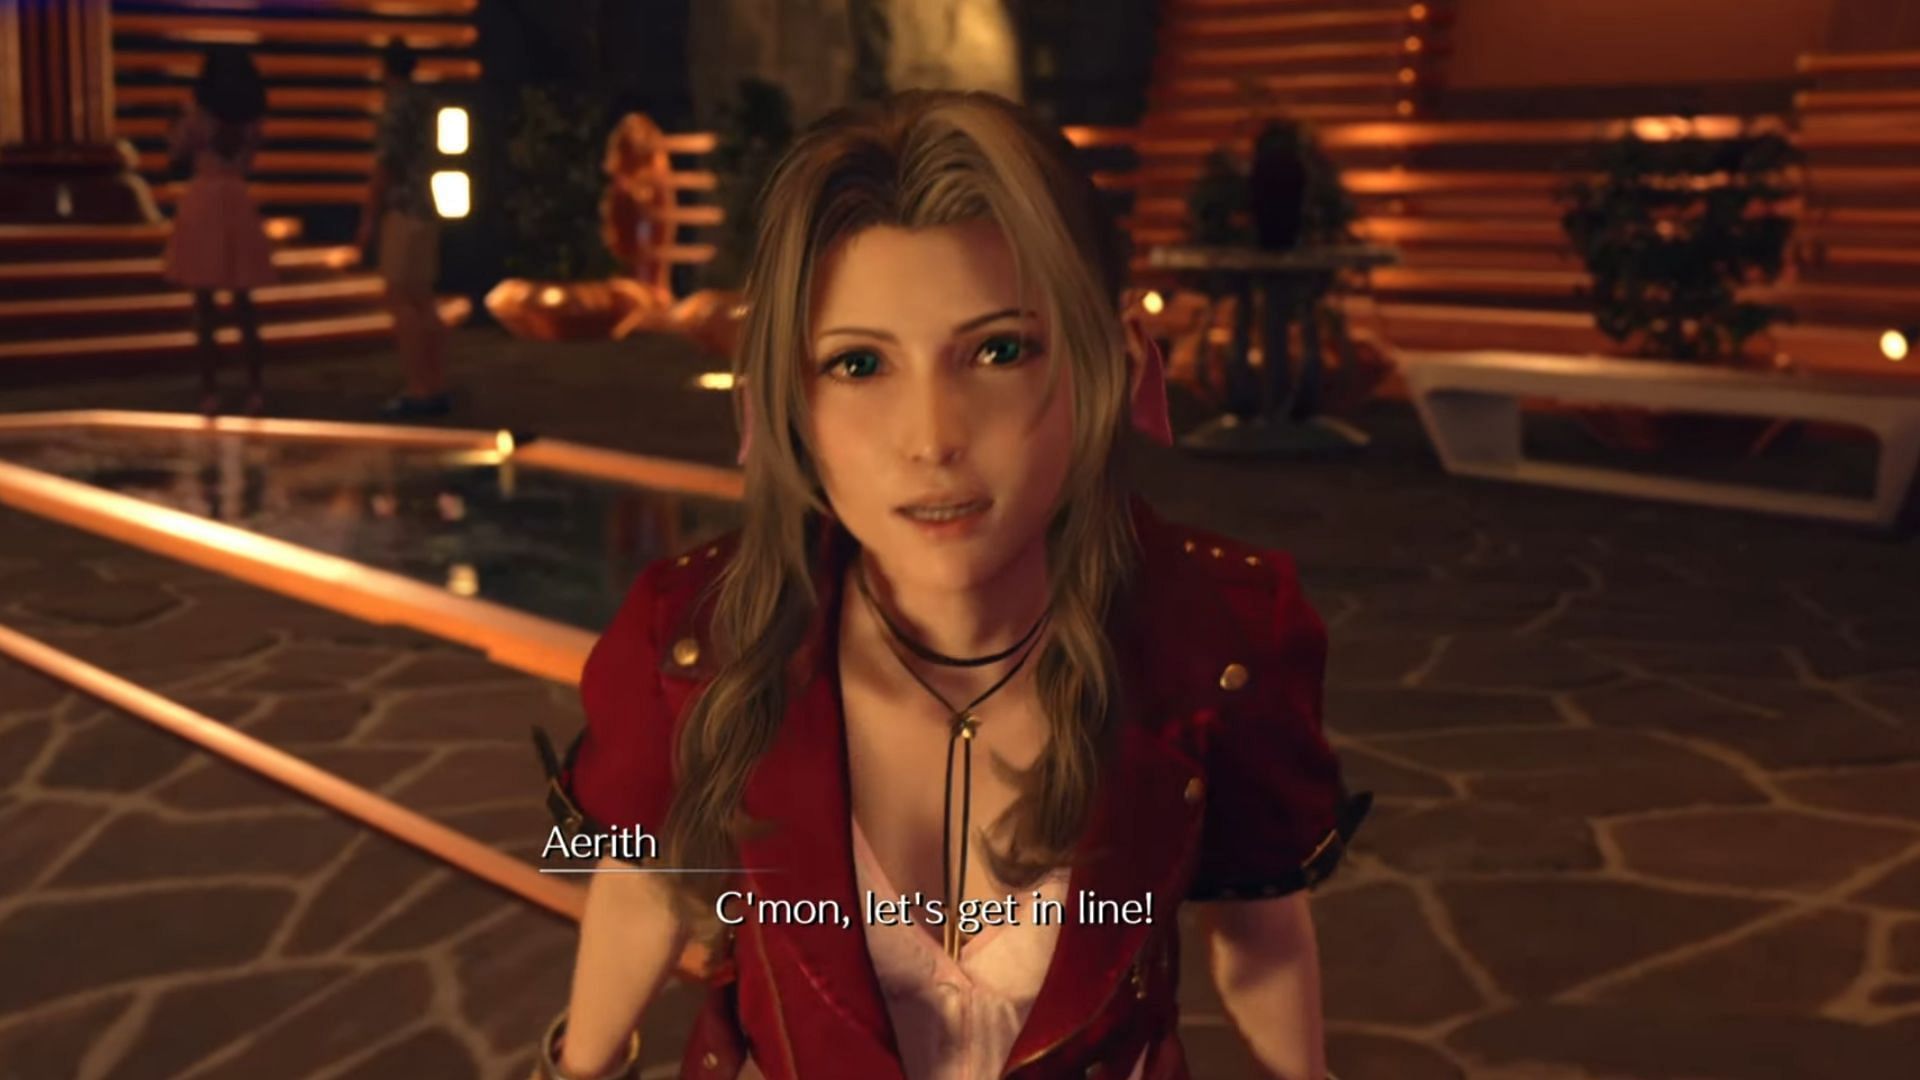 You need to select certain dialog choices to quickly increase your affinity with Aerith in Final Fantasy 7 Rebirth (Image via Square Enix)